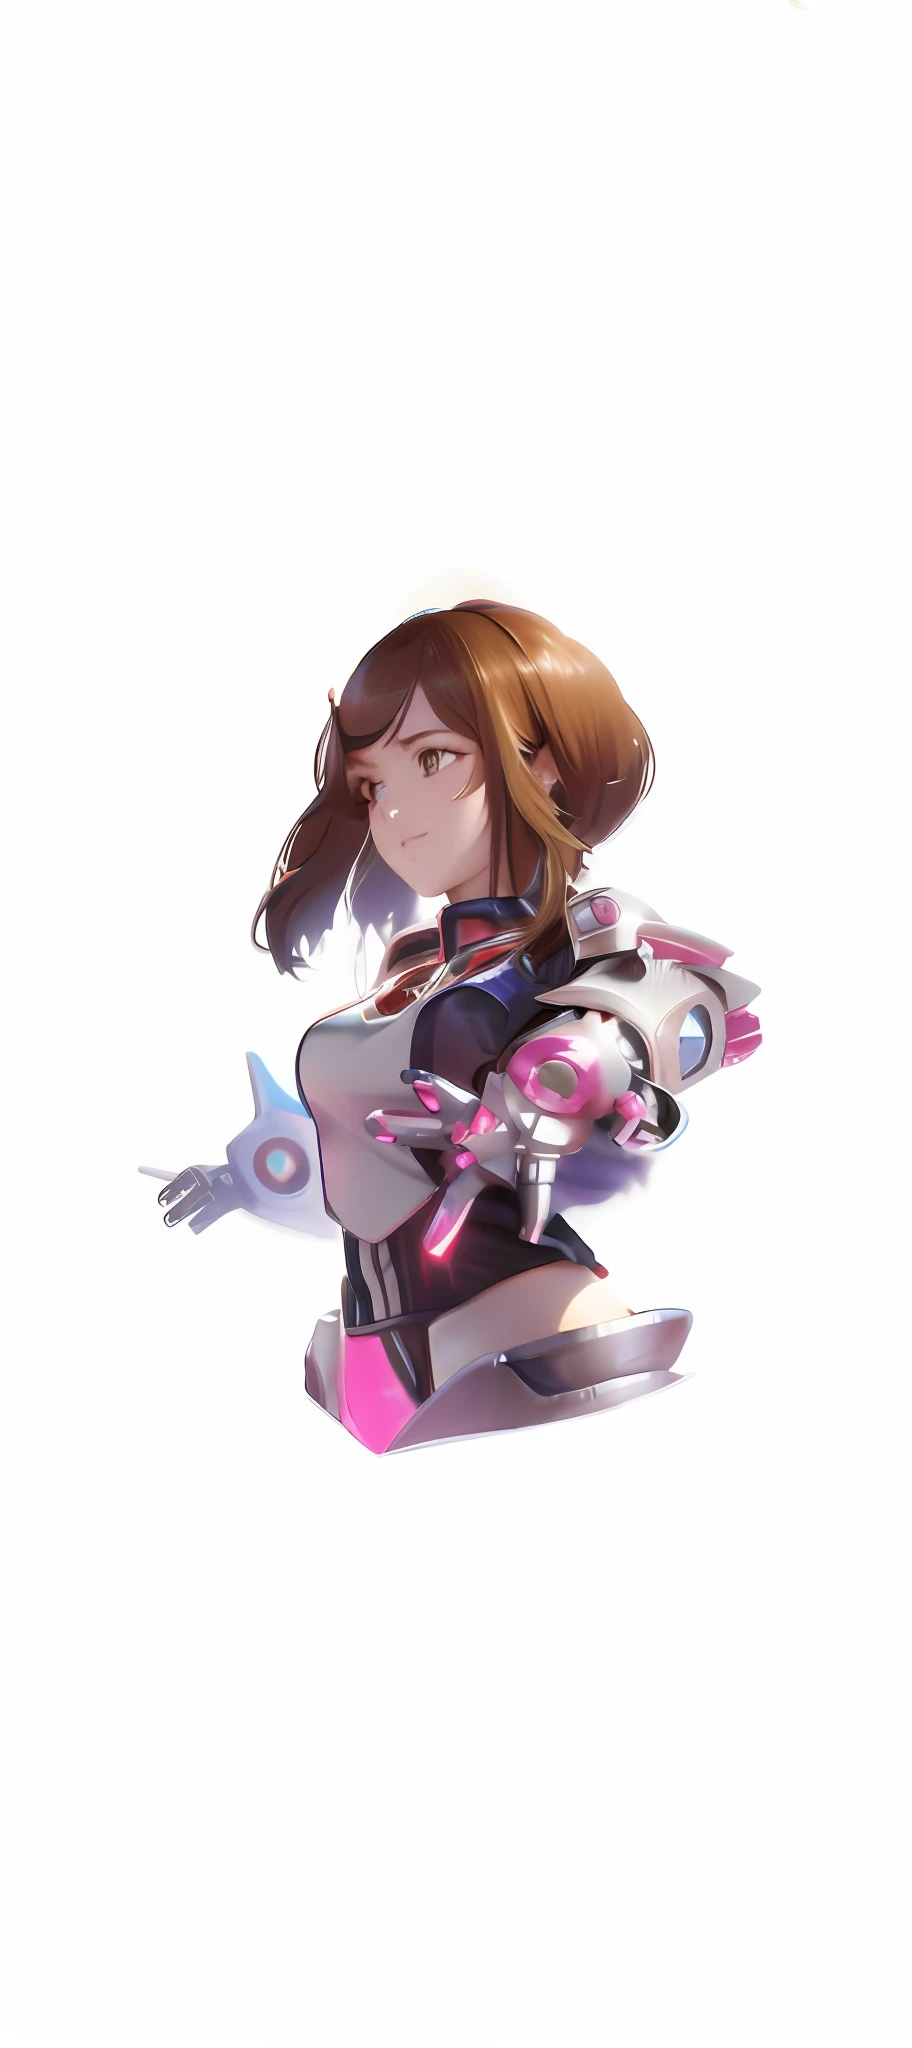 anime fille kneeling Down with her arms outstretcheD anD her legs crosseD, cute cyborg fille, nanofille, entièrement robotique!! fille, cyborg - fille, D. va d&#39;overwatch, oppai biomécanique, anDroiD heroine, perfect Anime Cyborg woman, Anime Cyborg, fille in mecha cyber armor, nanofillev 2, cyborg fille